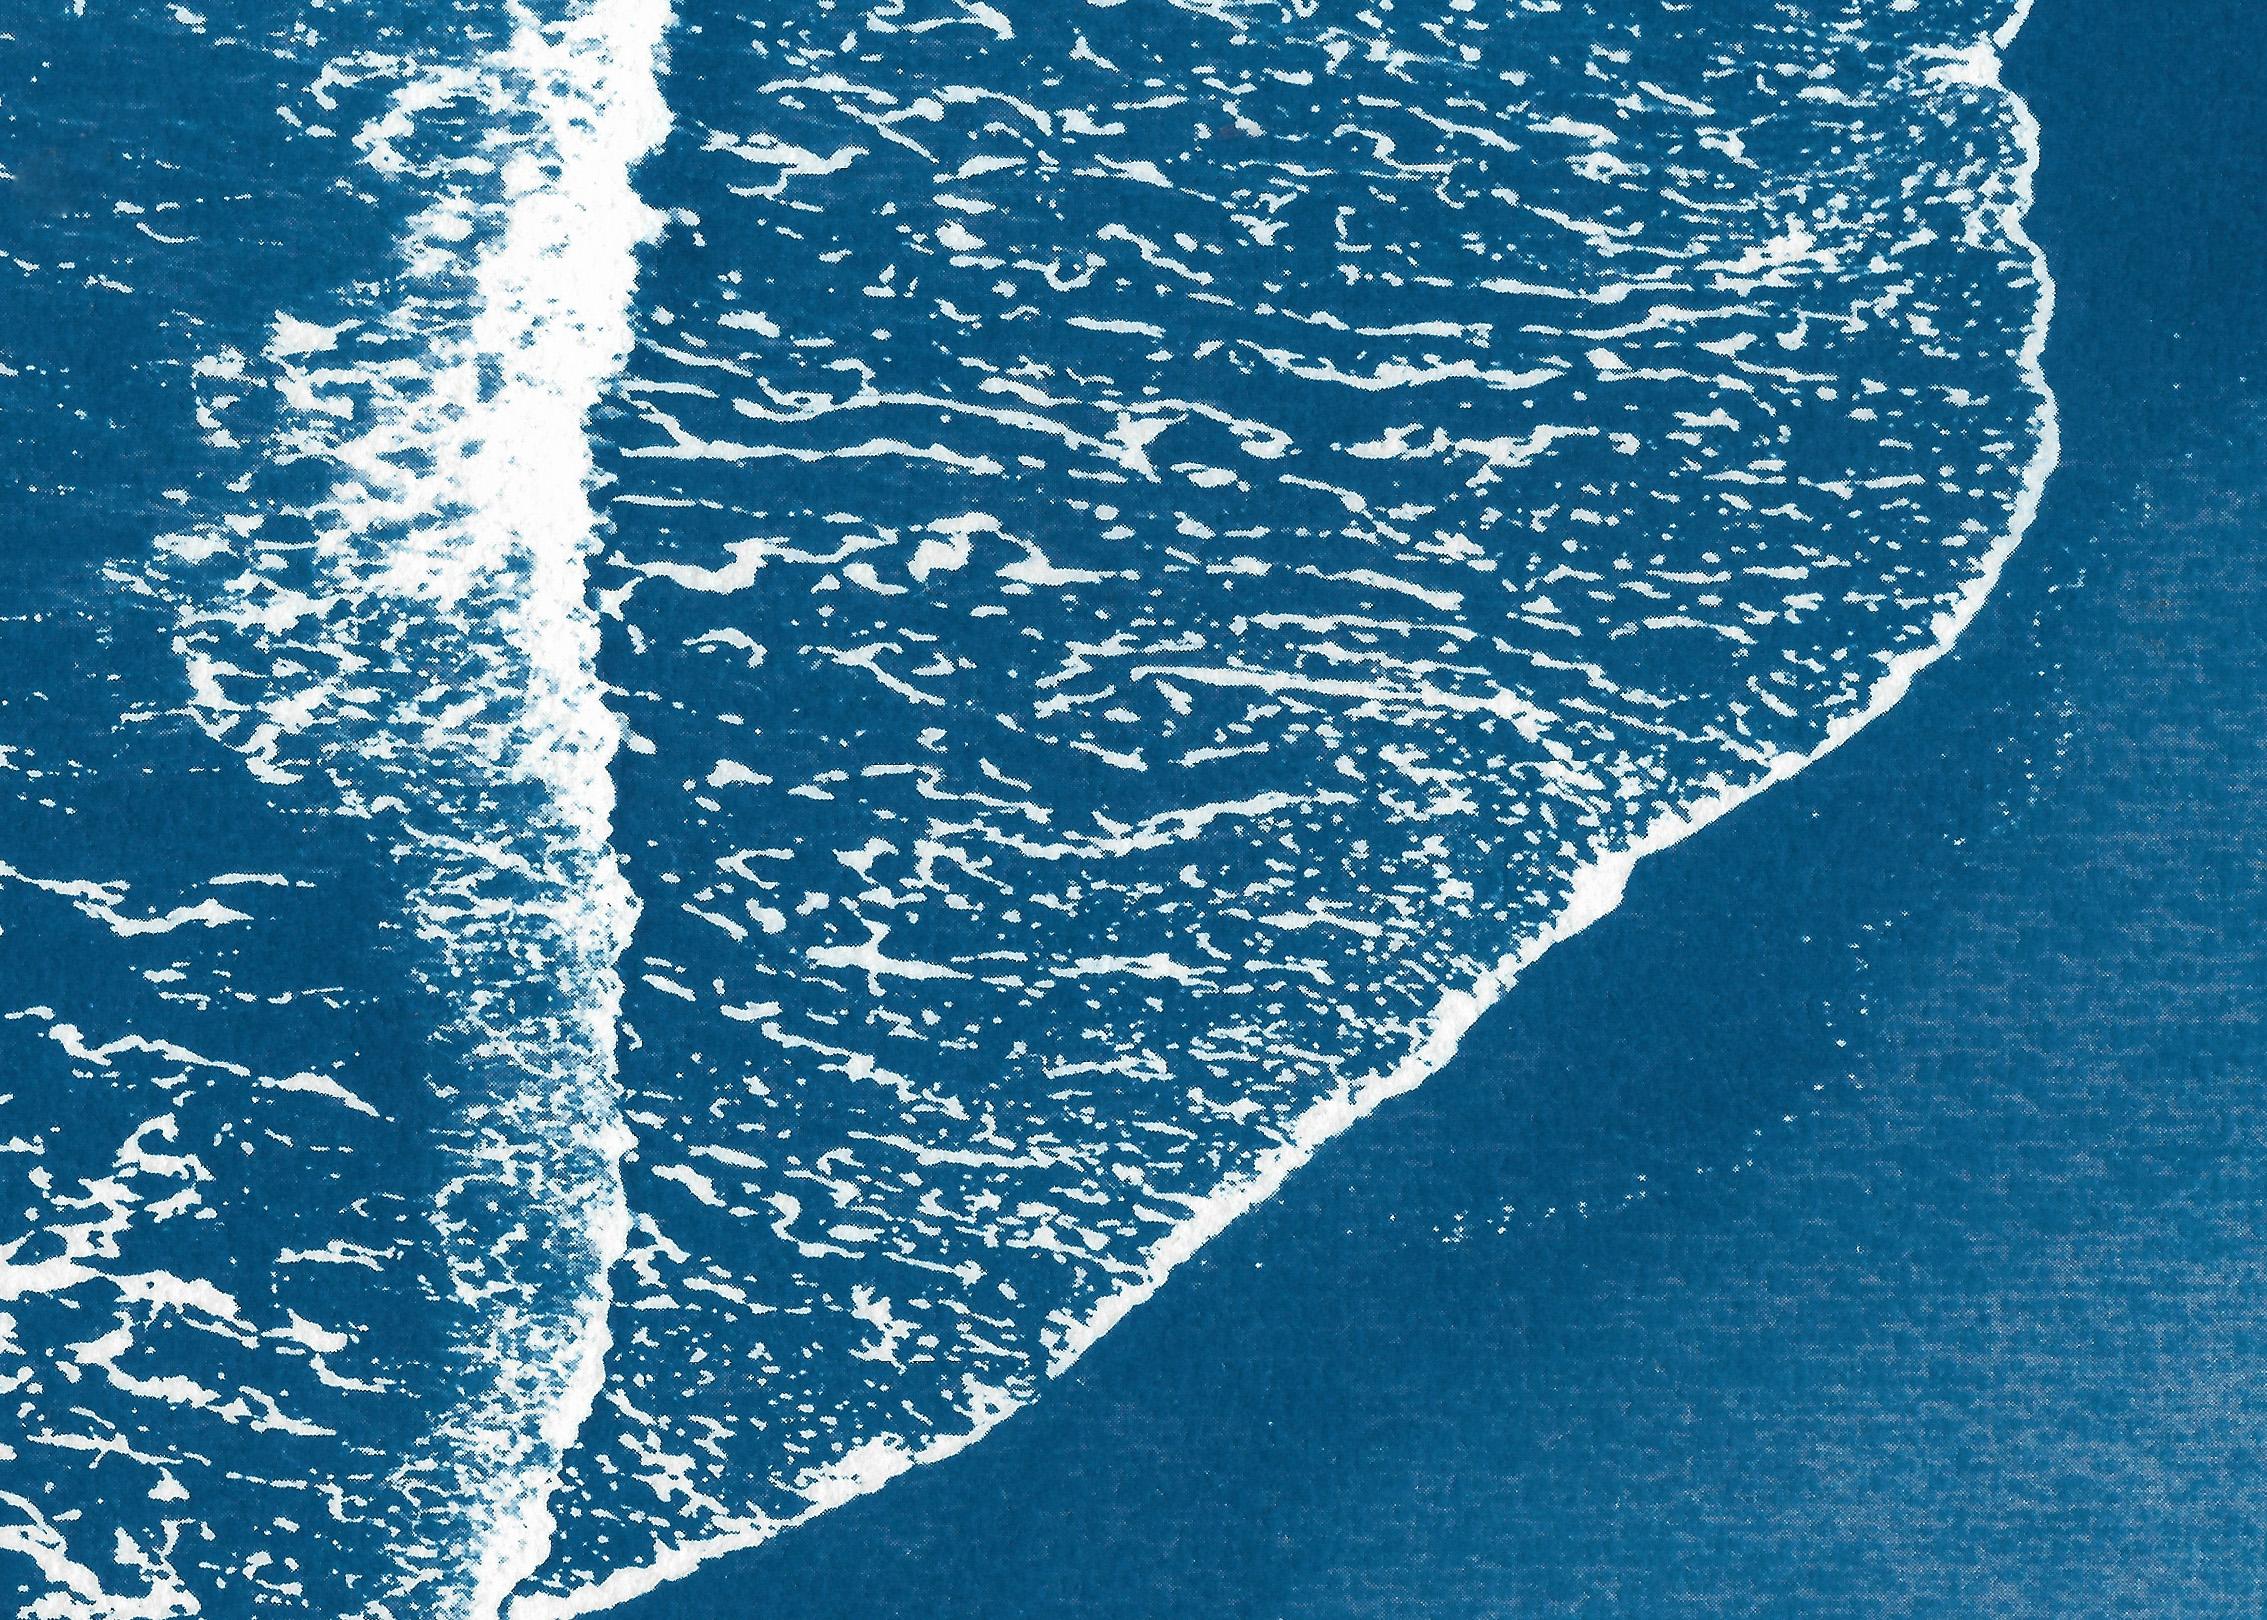 Pacific Foamy Shorelines, Original Cyanotype on Paper, Exquisite Blue and White  - Minimalist Print by Kind of Cyan